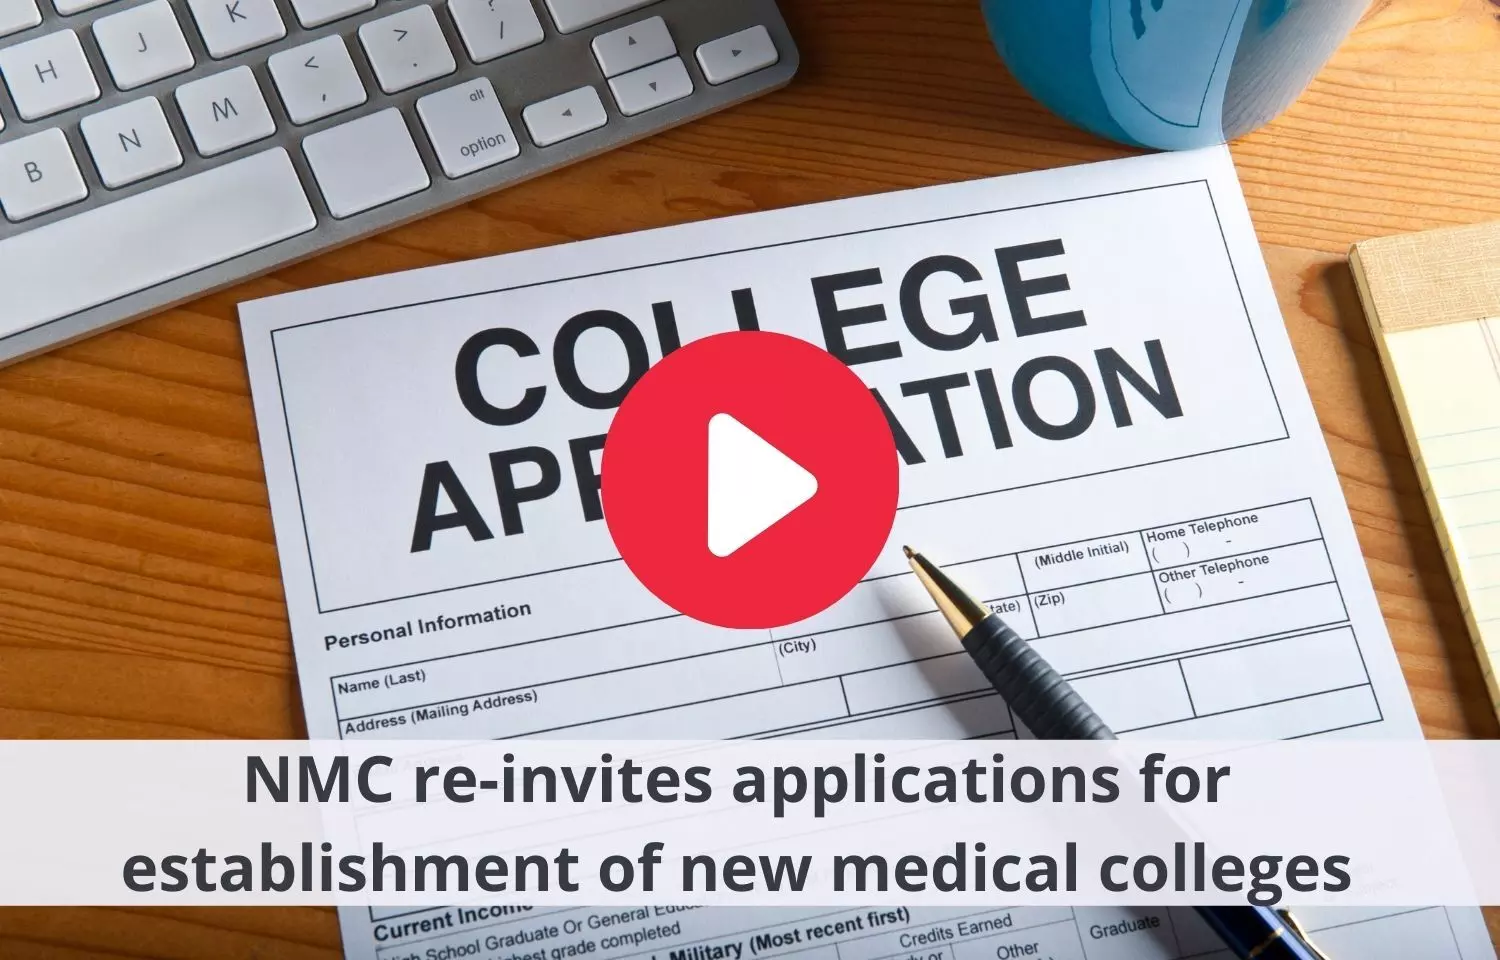 NMC re-invites applications for establishment of new medical colleges